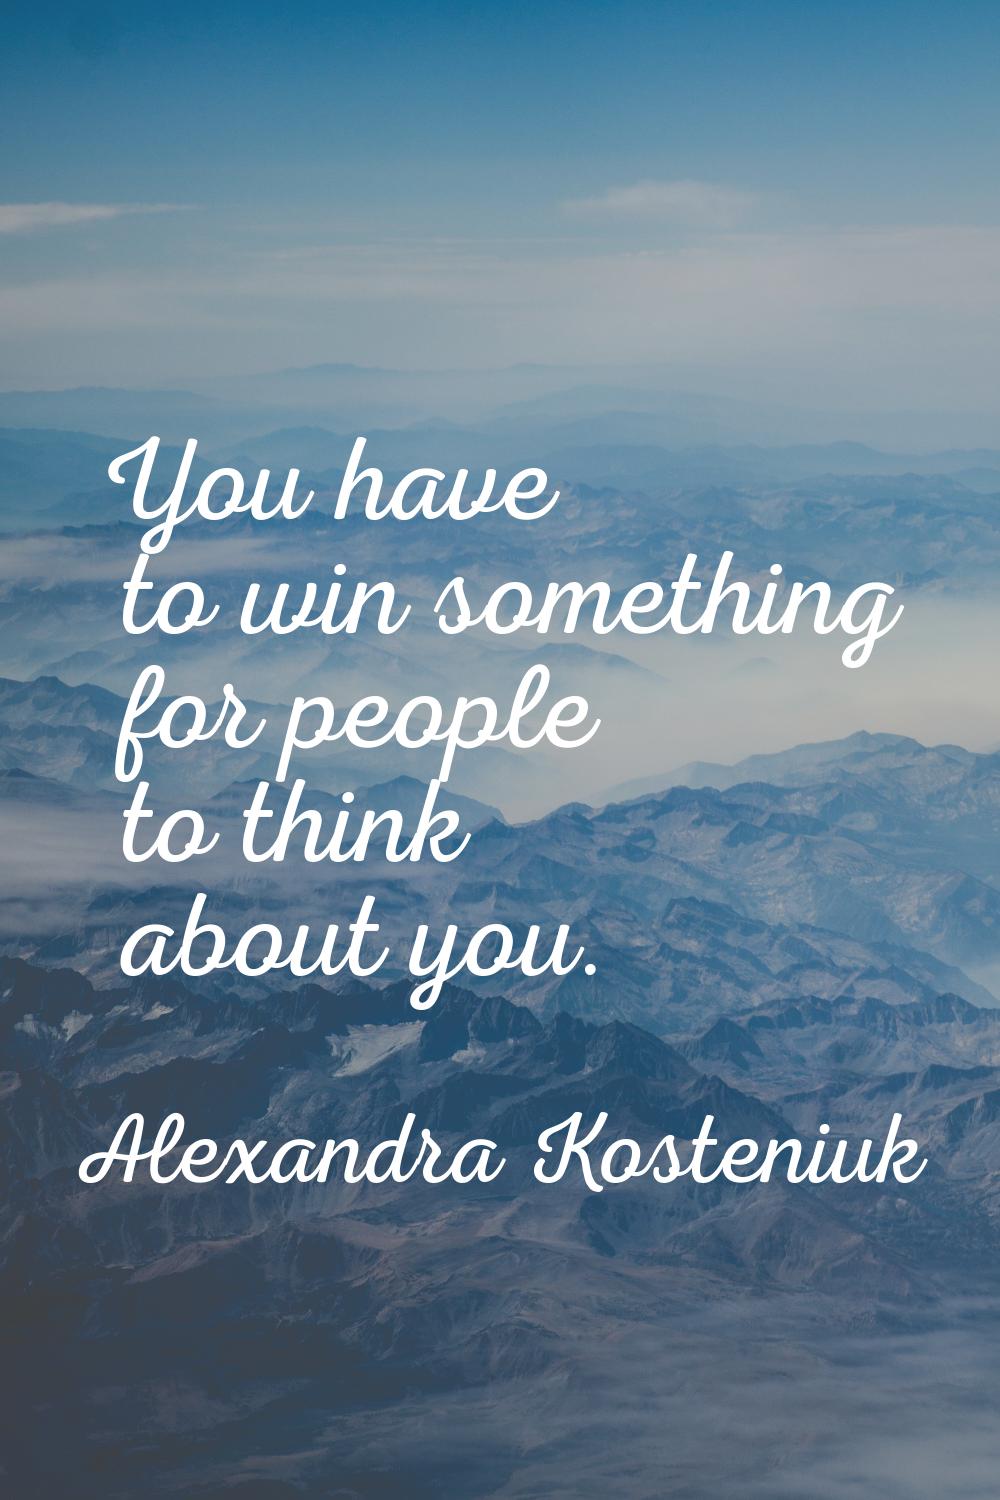 You have to win something for people to think about you.